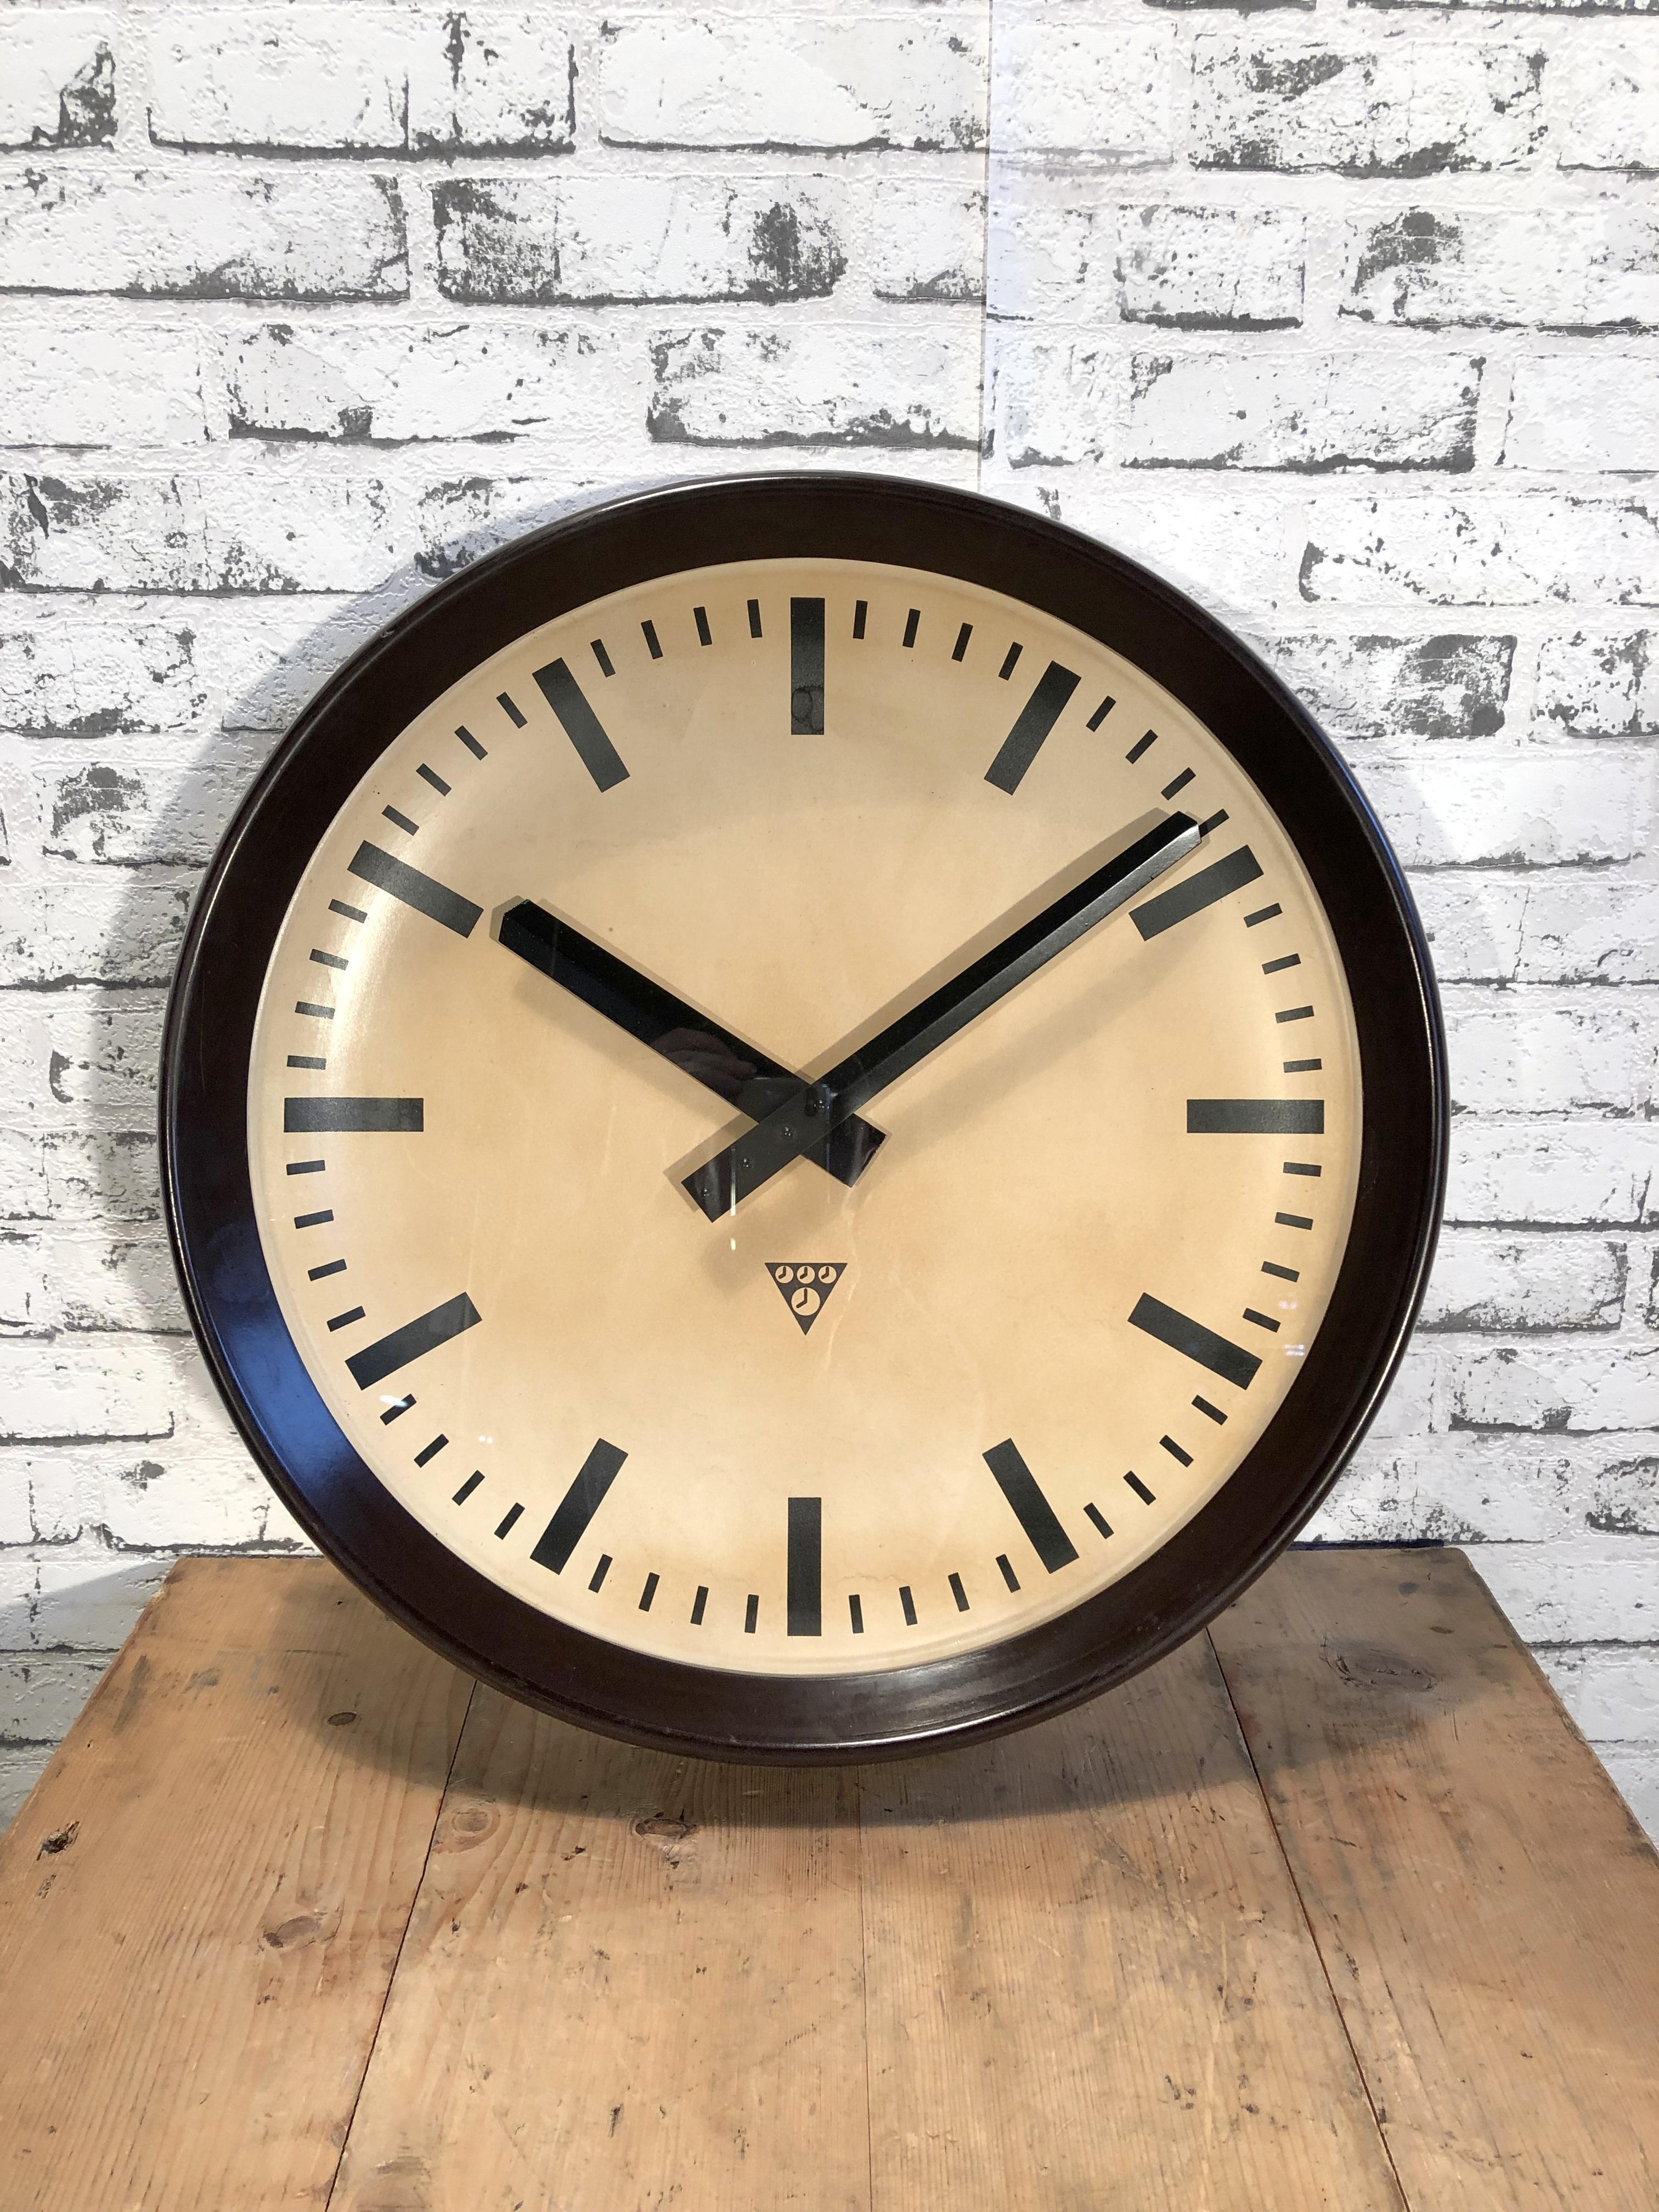 This large wall clock was produced by Pragotron in former Czechoslovakia during the 1960s.It features a brown bakelite frame, aluminium dial and clear glass cover.The piece has been converted into a battery-powered clockwork and requires only one